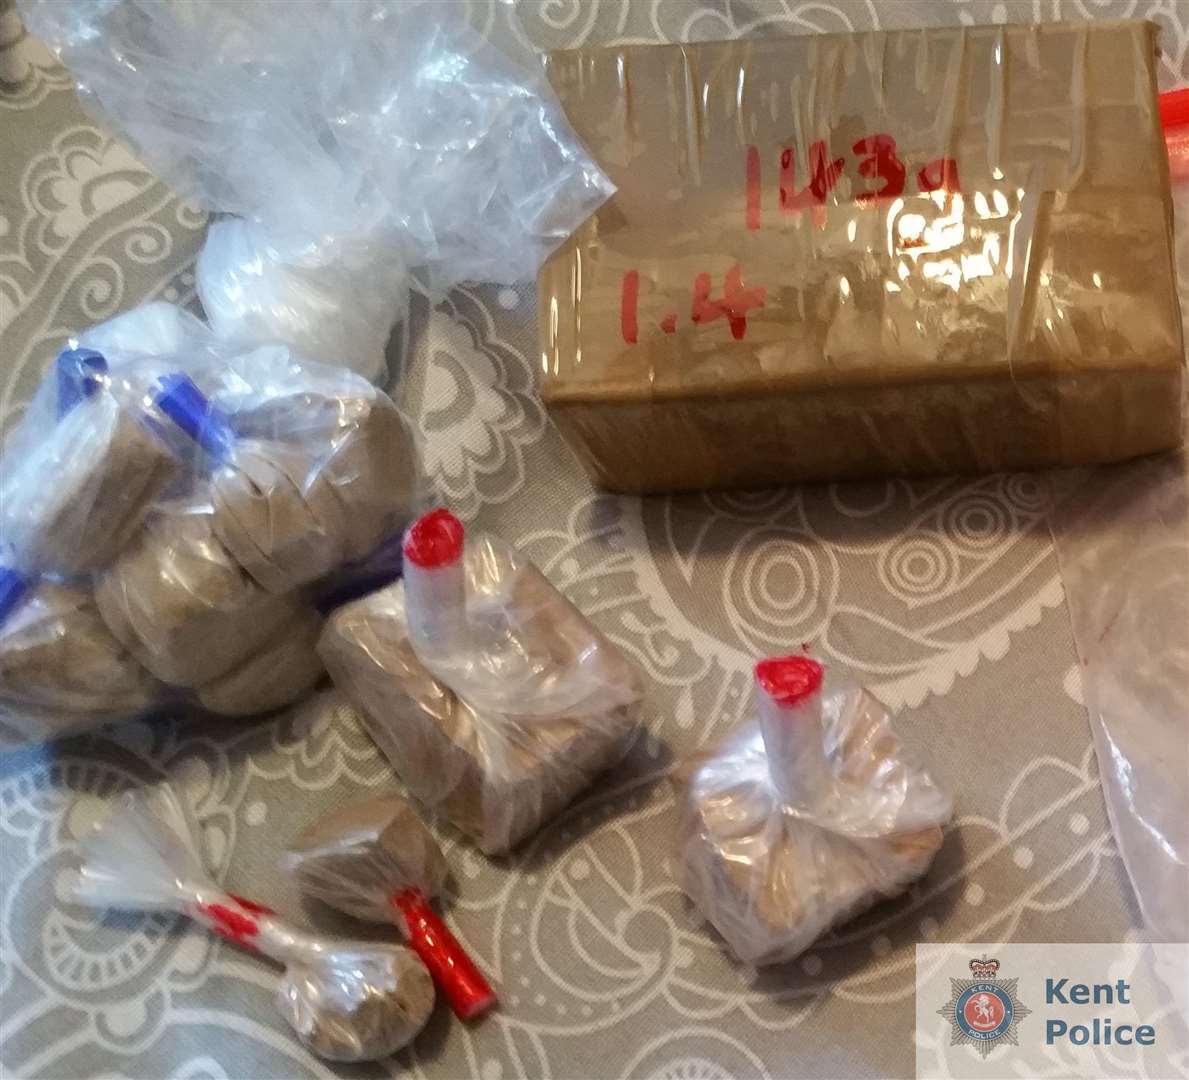 At least 1.5kg of heroin was found in the search. Picture: Kent Police (4069871)